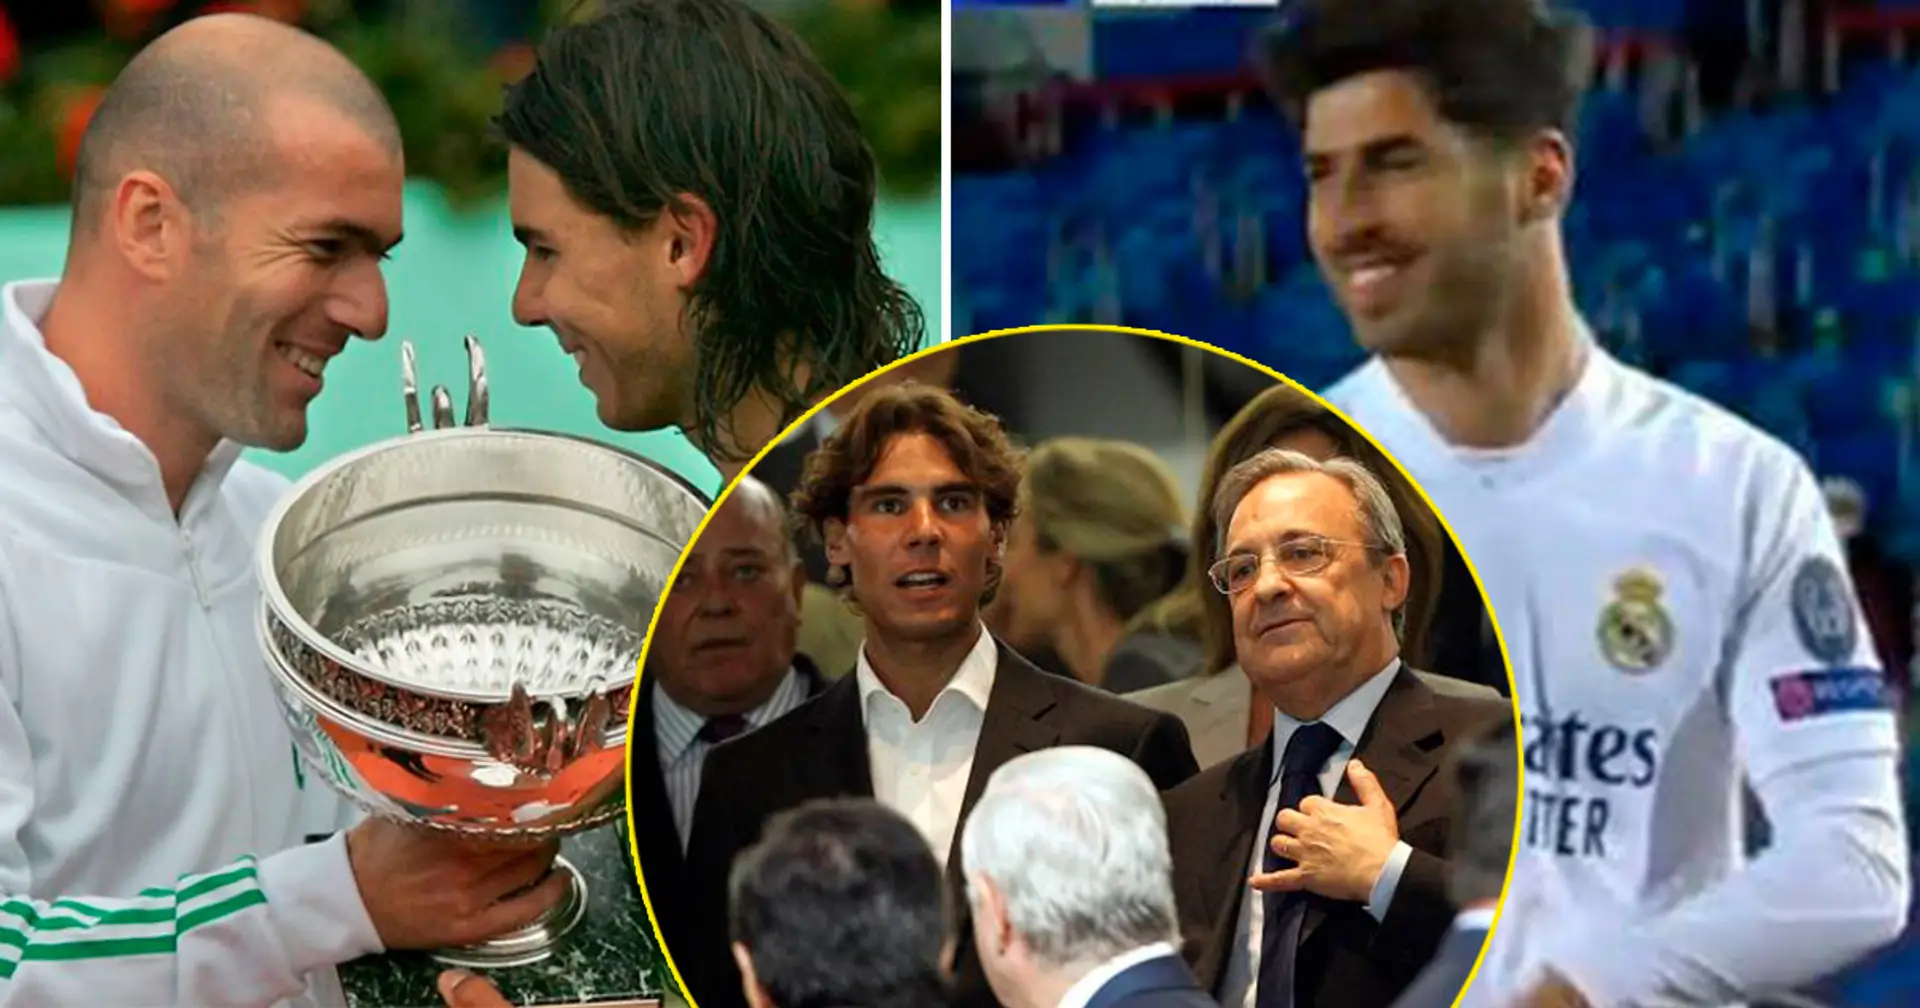 How Rafa Nadal played key role in persuading Madrid to sign Asensio